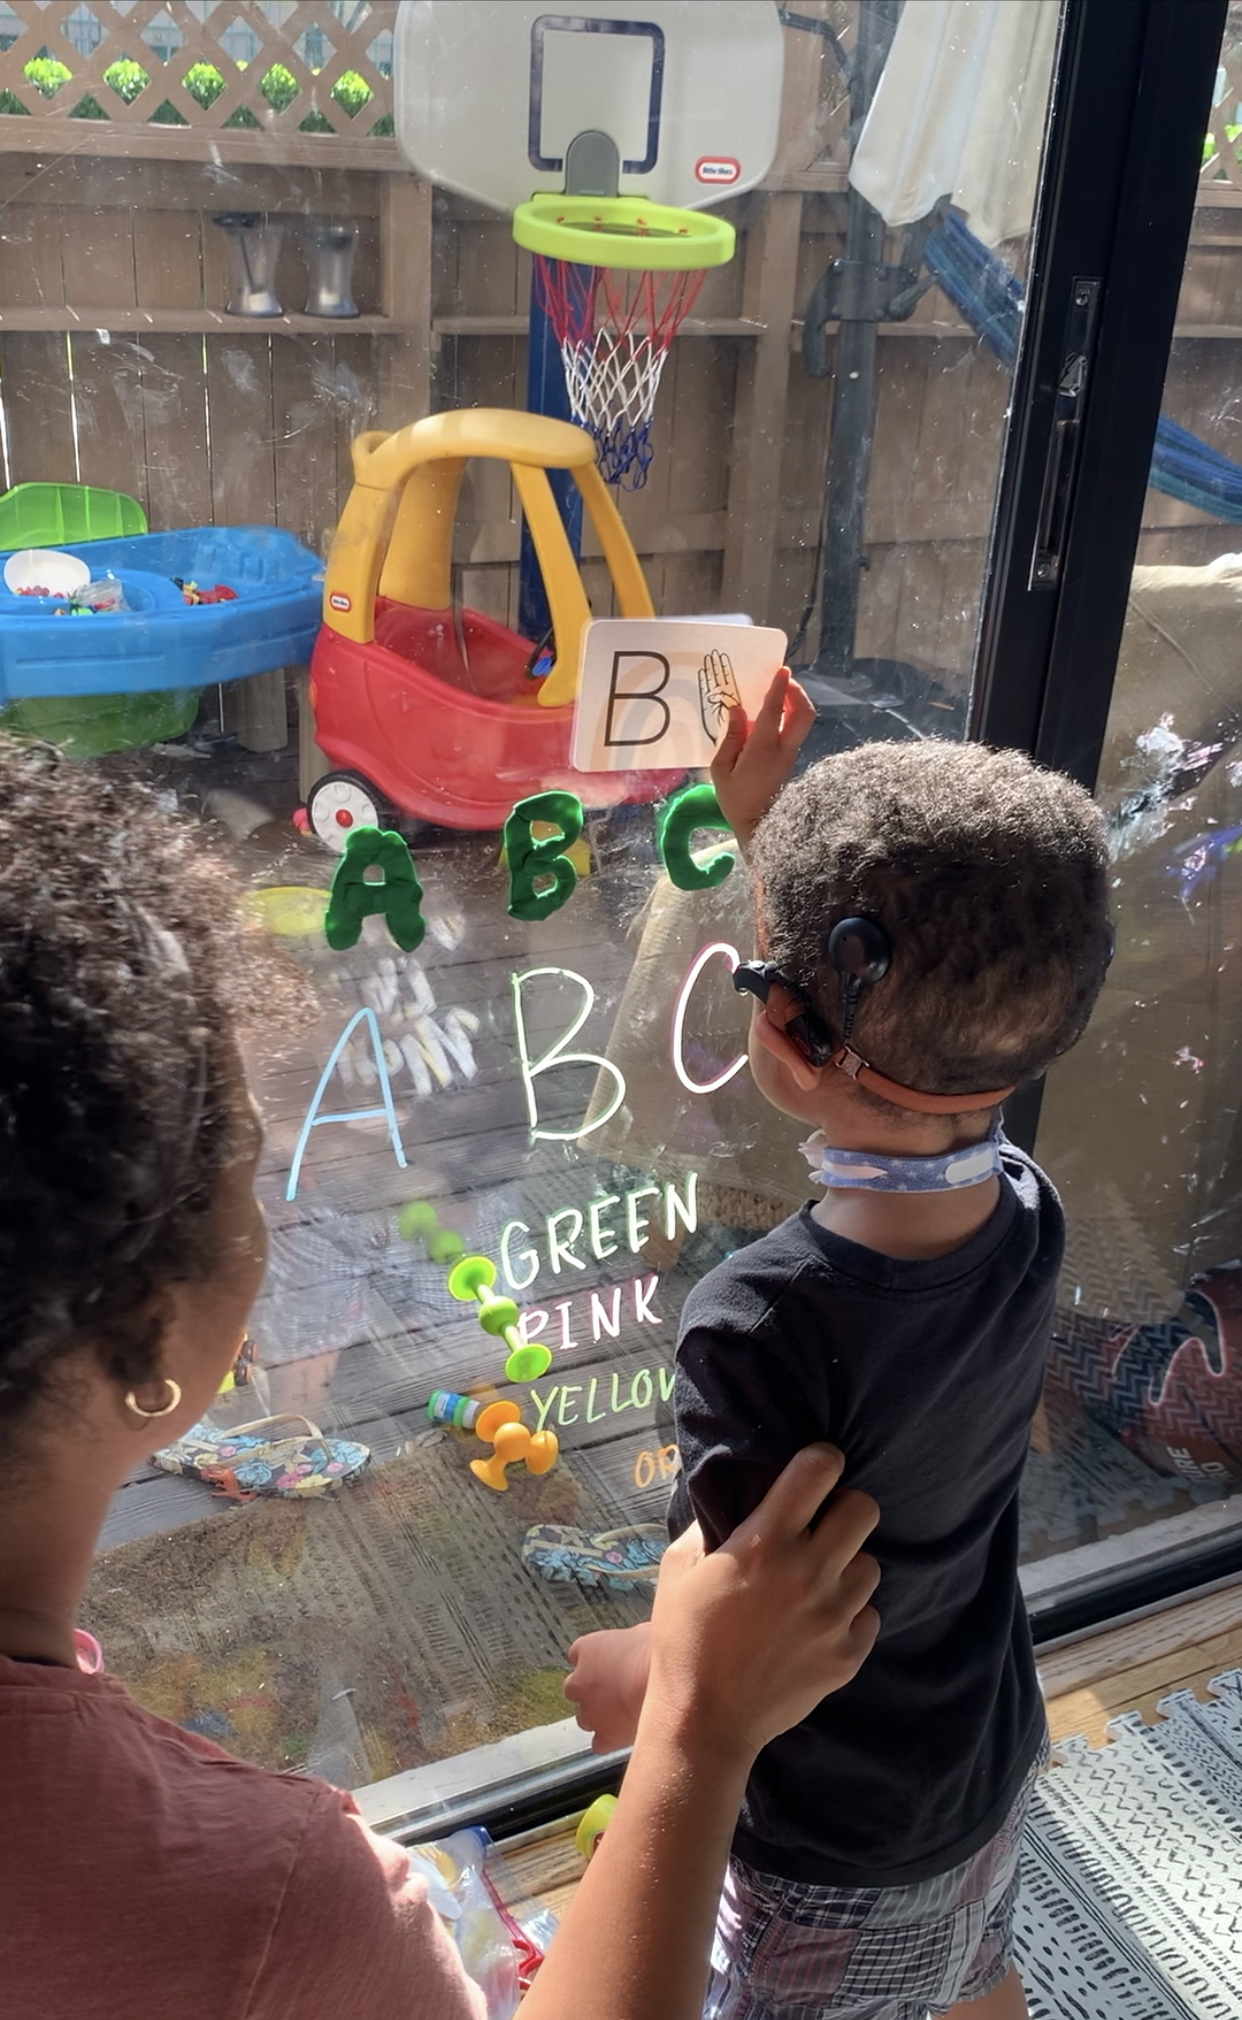 Jaxson identifies letters of the alphabet through stickers placed on a window.